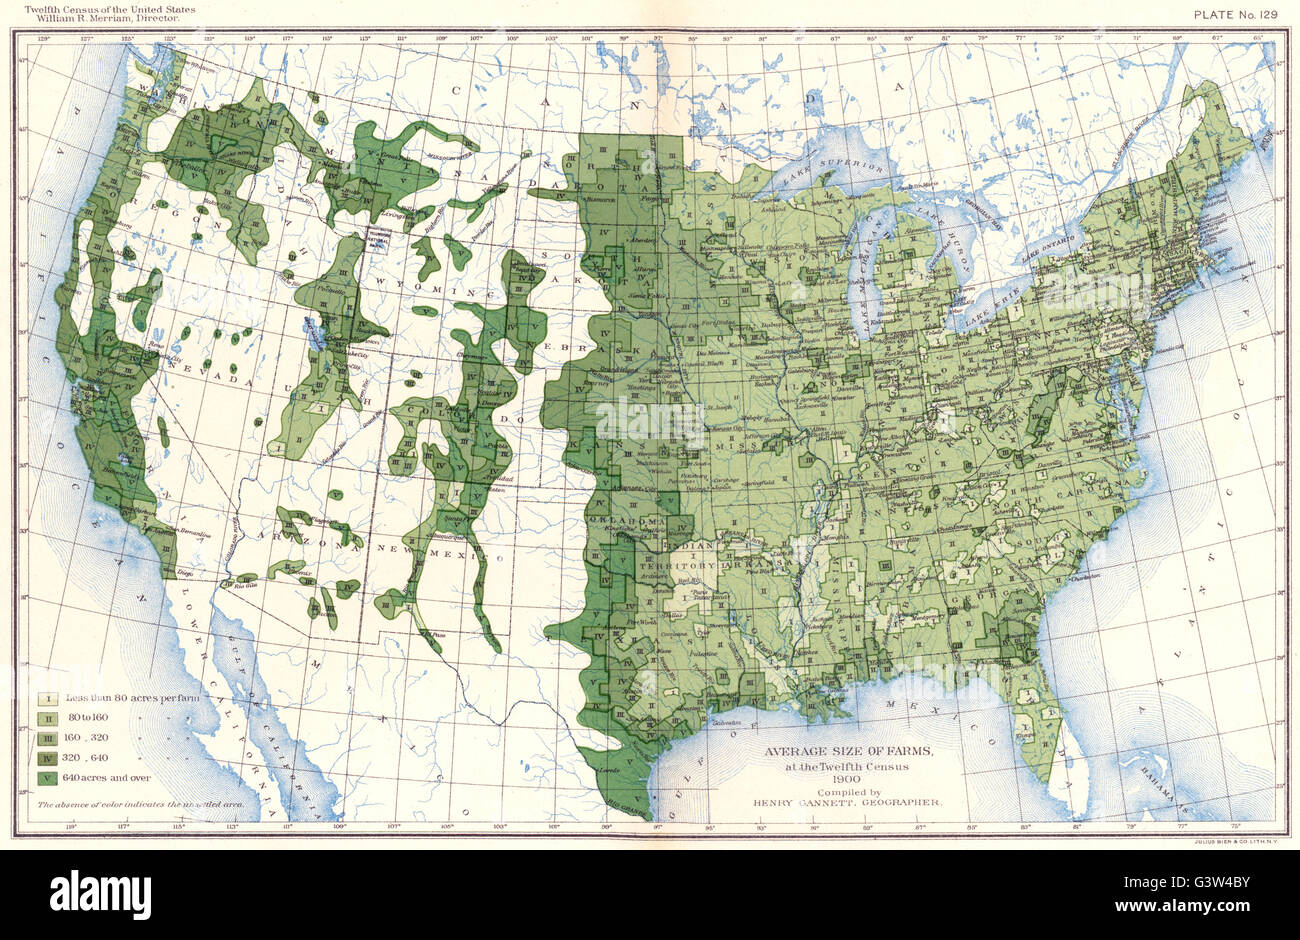 USA: Average size of farms at the twelfth census , 1900 antique map Stock Photo